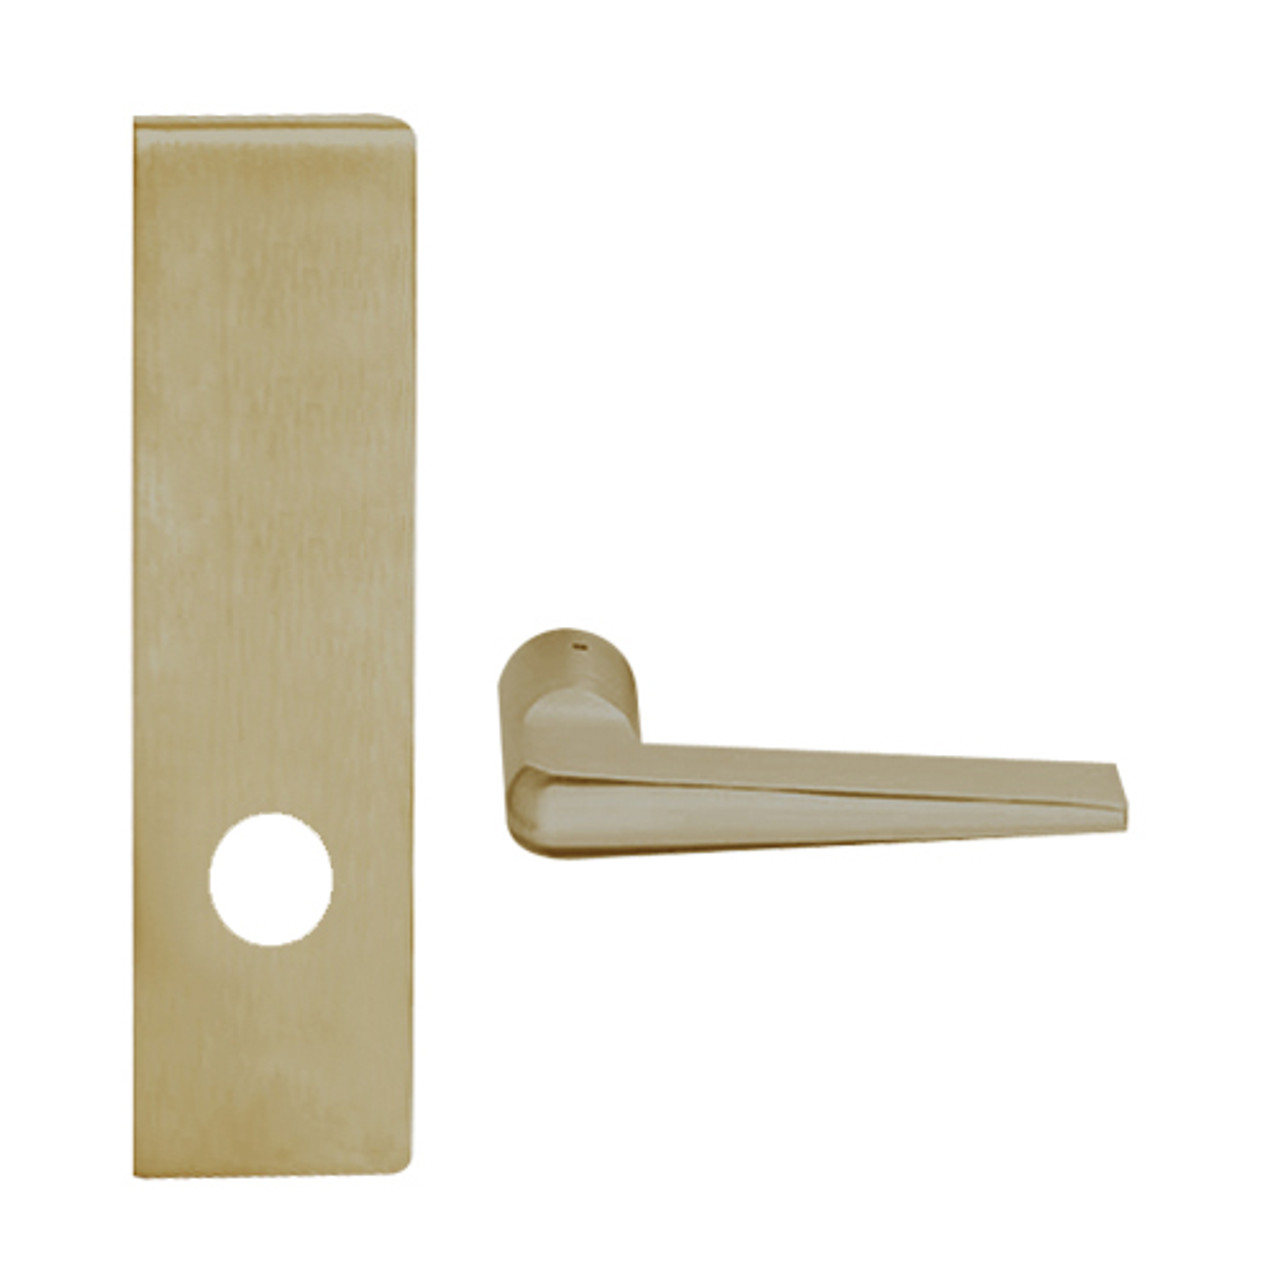 L9010-05N-612 Schlage L Series Passage Latch Commercial Mortise Lock with 05 Cast Lever Design in Satin Bronze